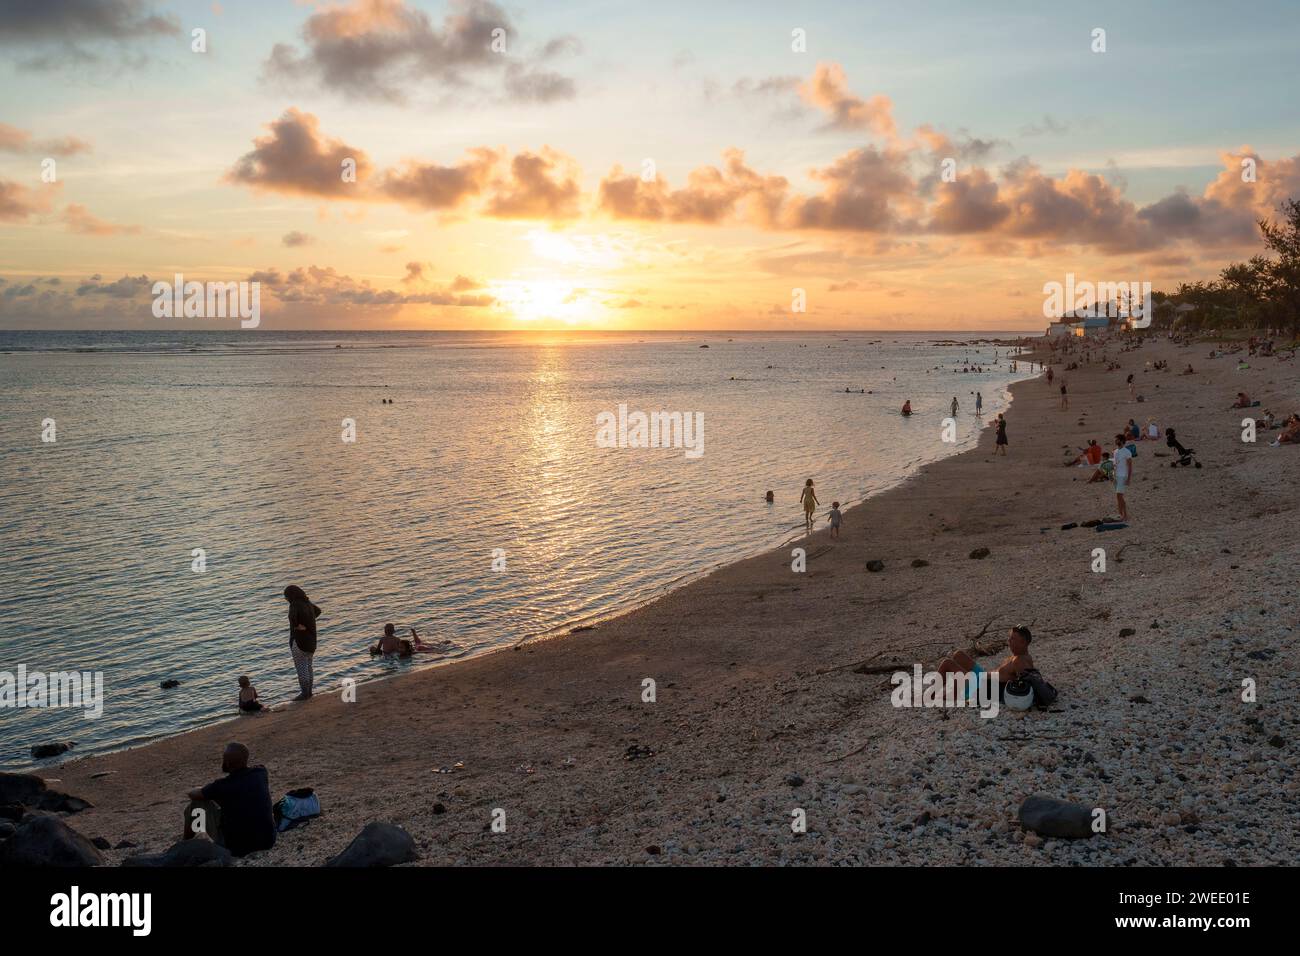 The beach at Saint-Pierre lagoon, Réunion Island, at sunset. Tourists, family and people enjoying the scenic view. It is a popular travel destination Stock Photo